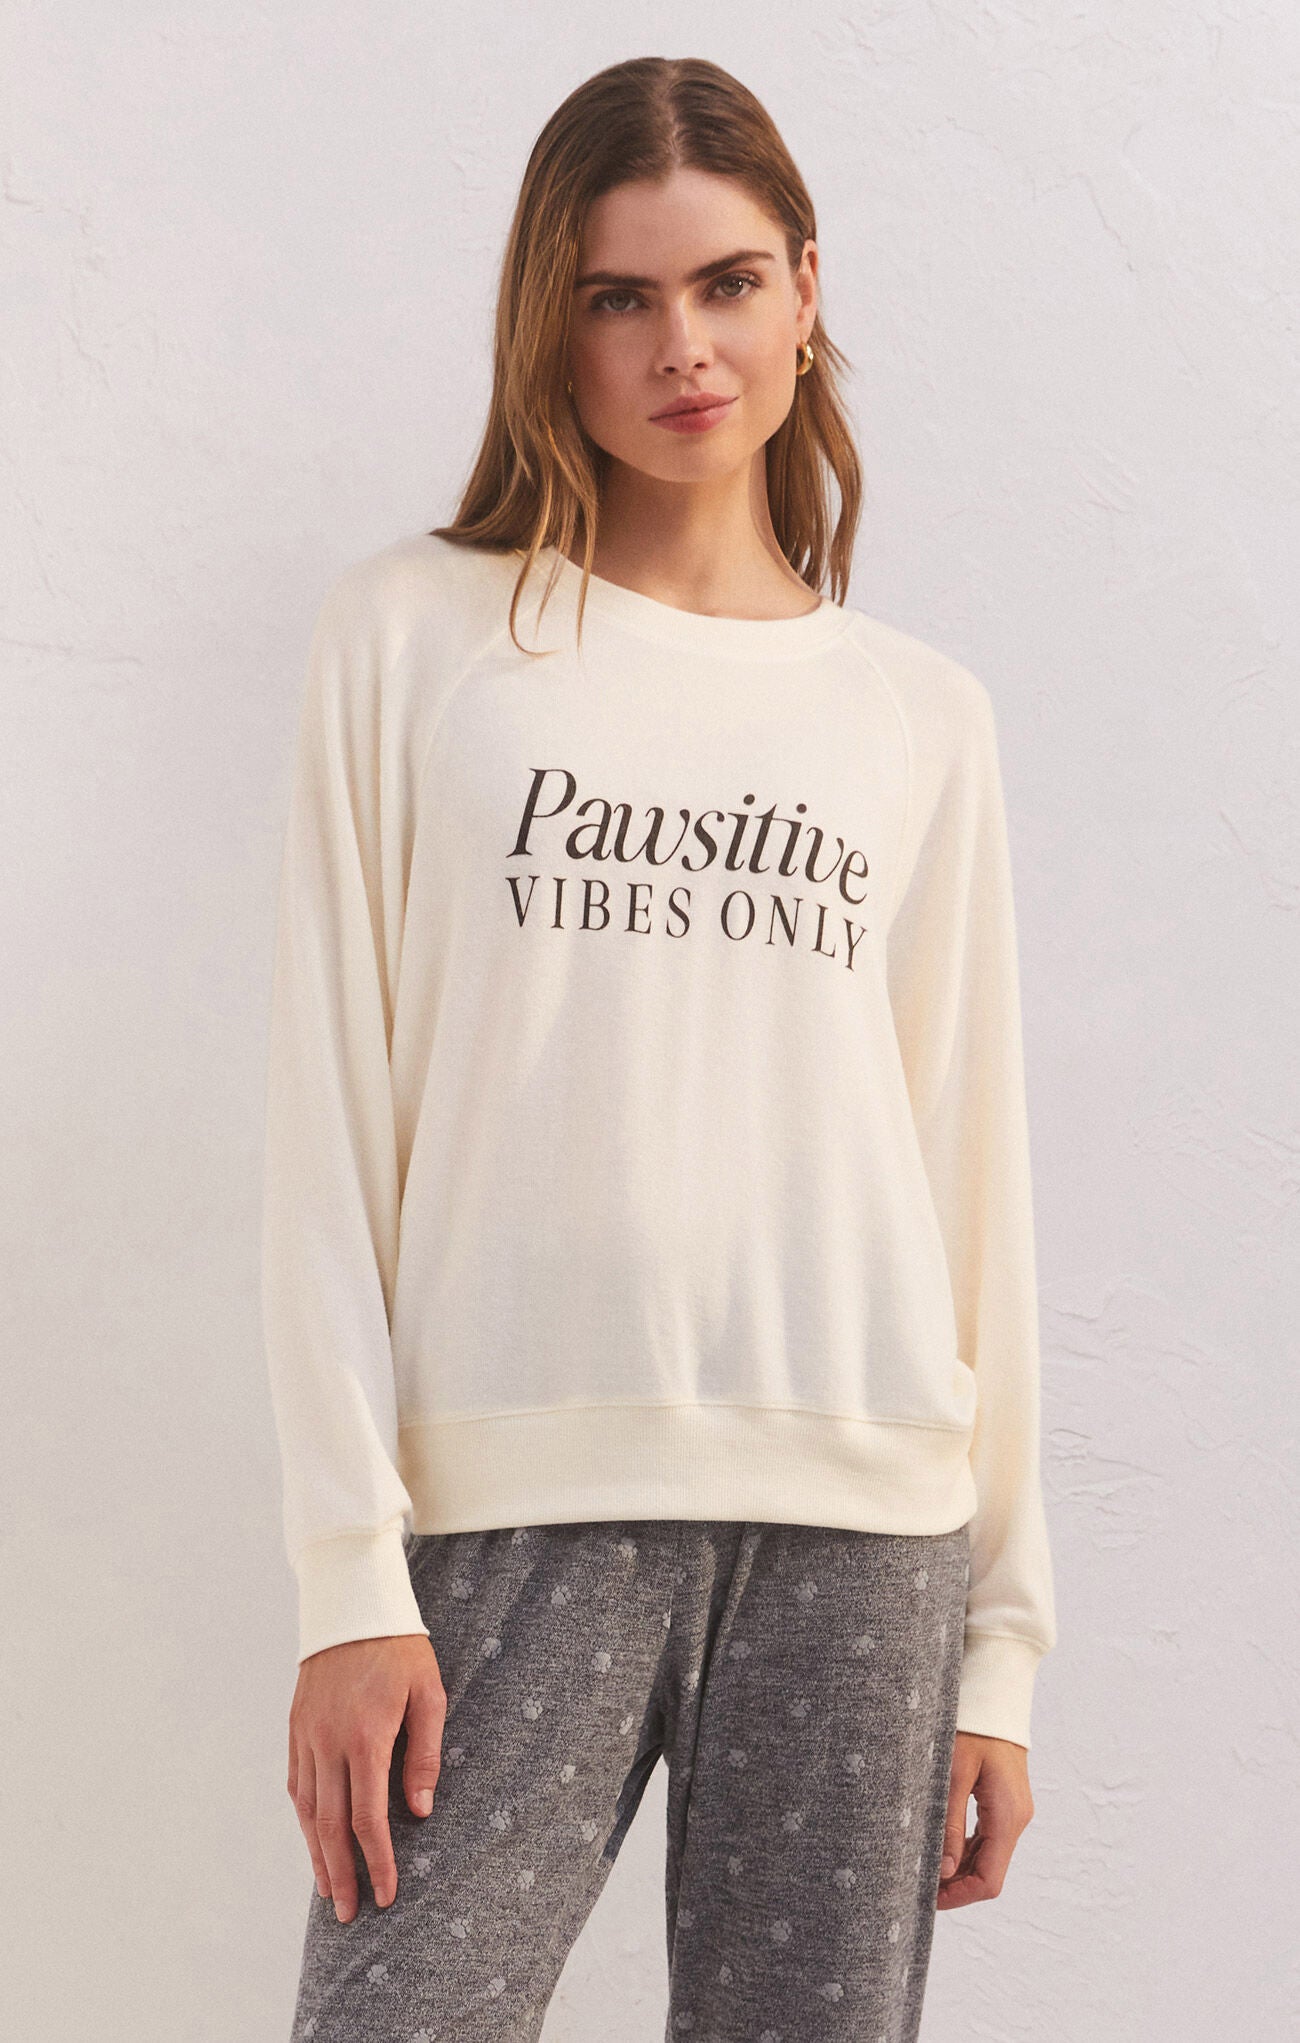 Cassie Pawsitive Vibes Only Long Sleeve Top Bone